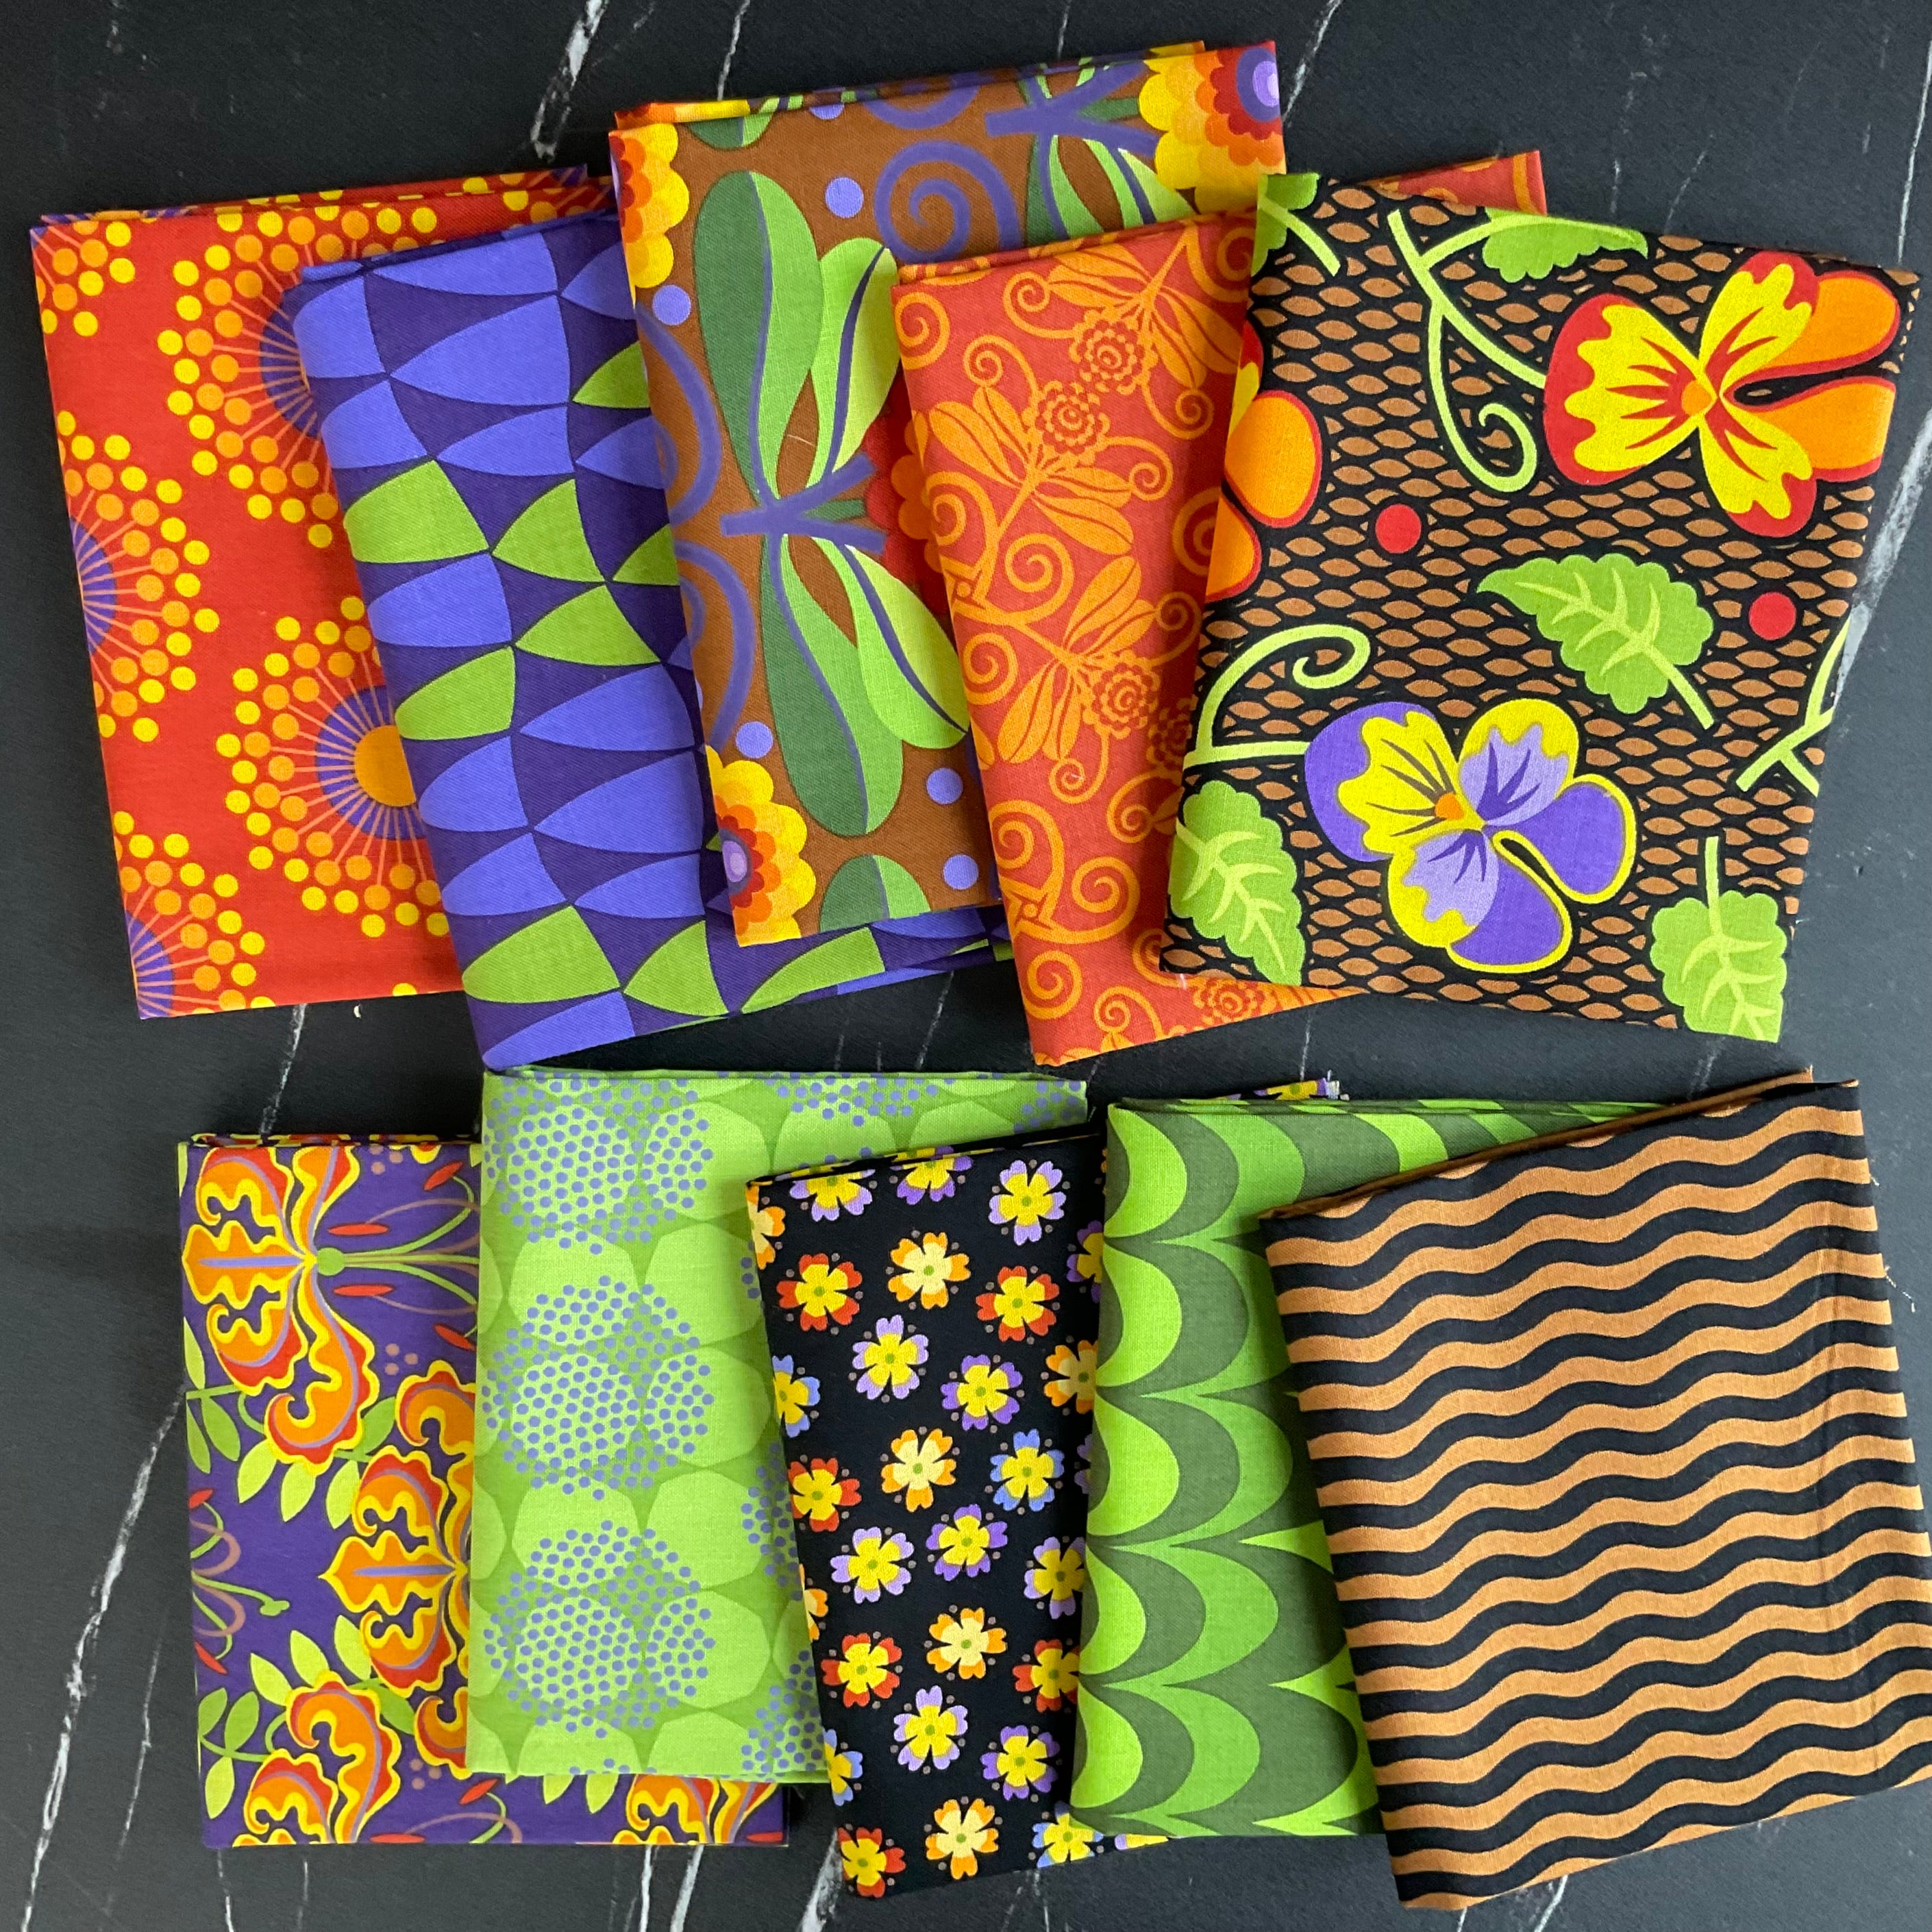 Printable Fabric : Australian Fabric, Quilting and Patchwork Material Store